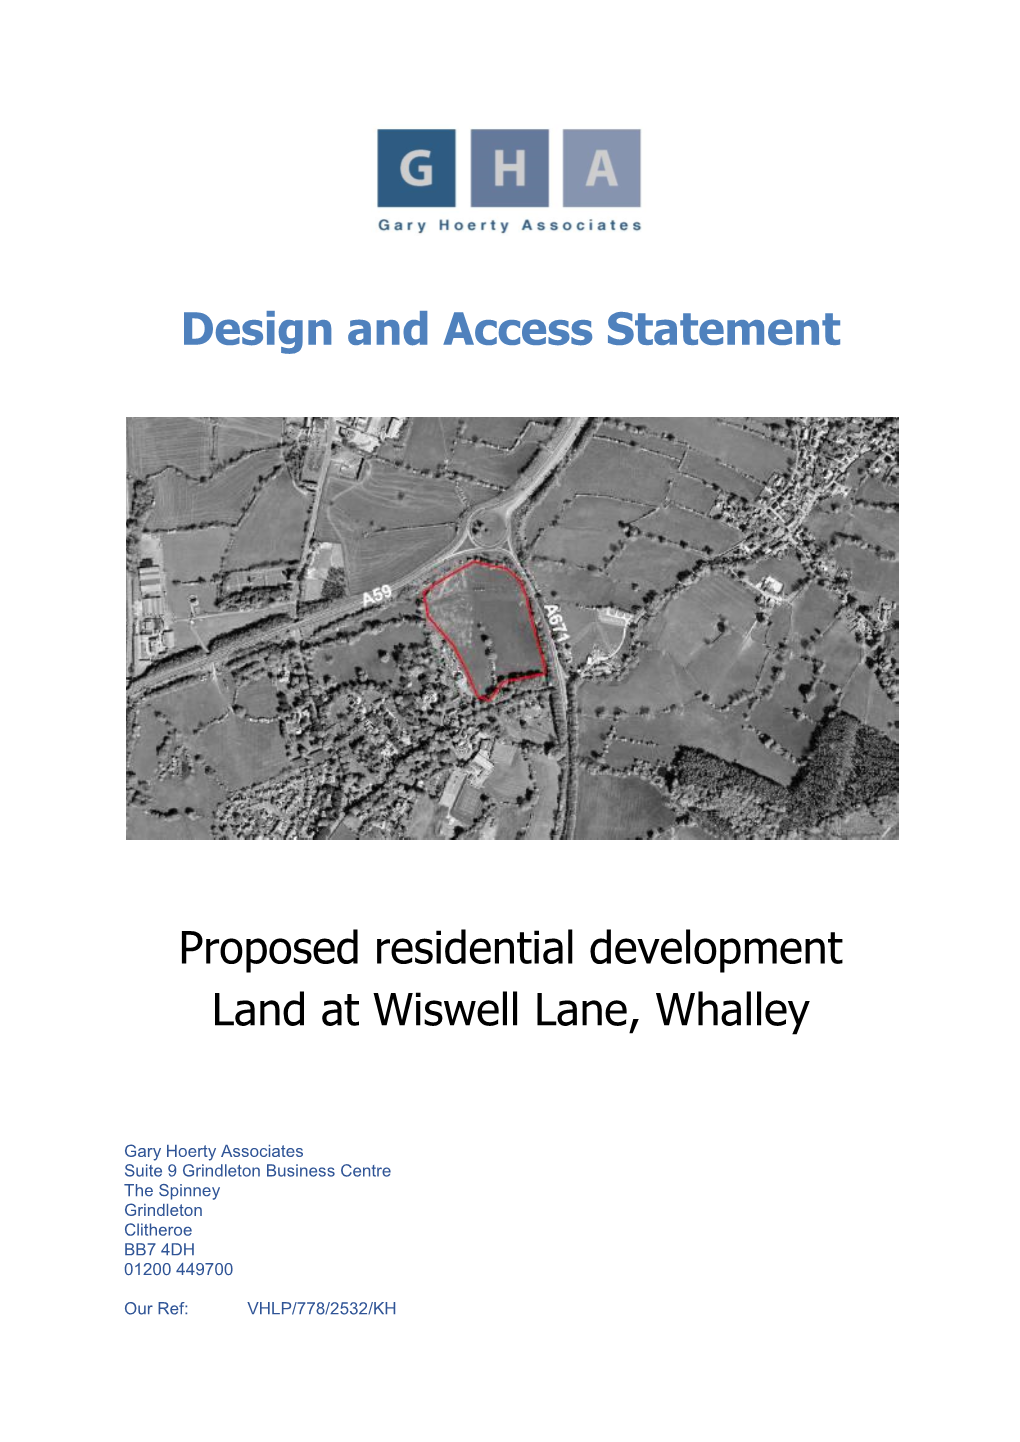 Design and Access Statement Proposed Residential Development